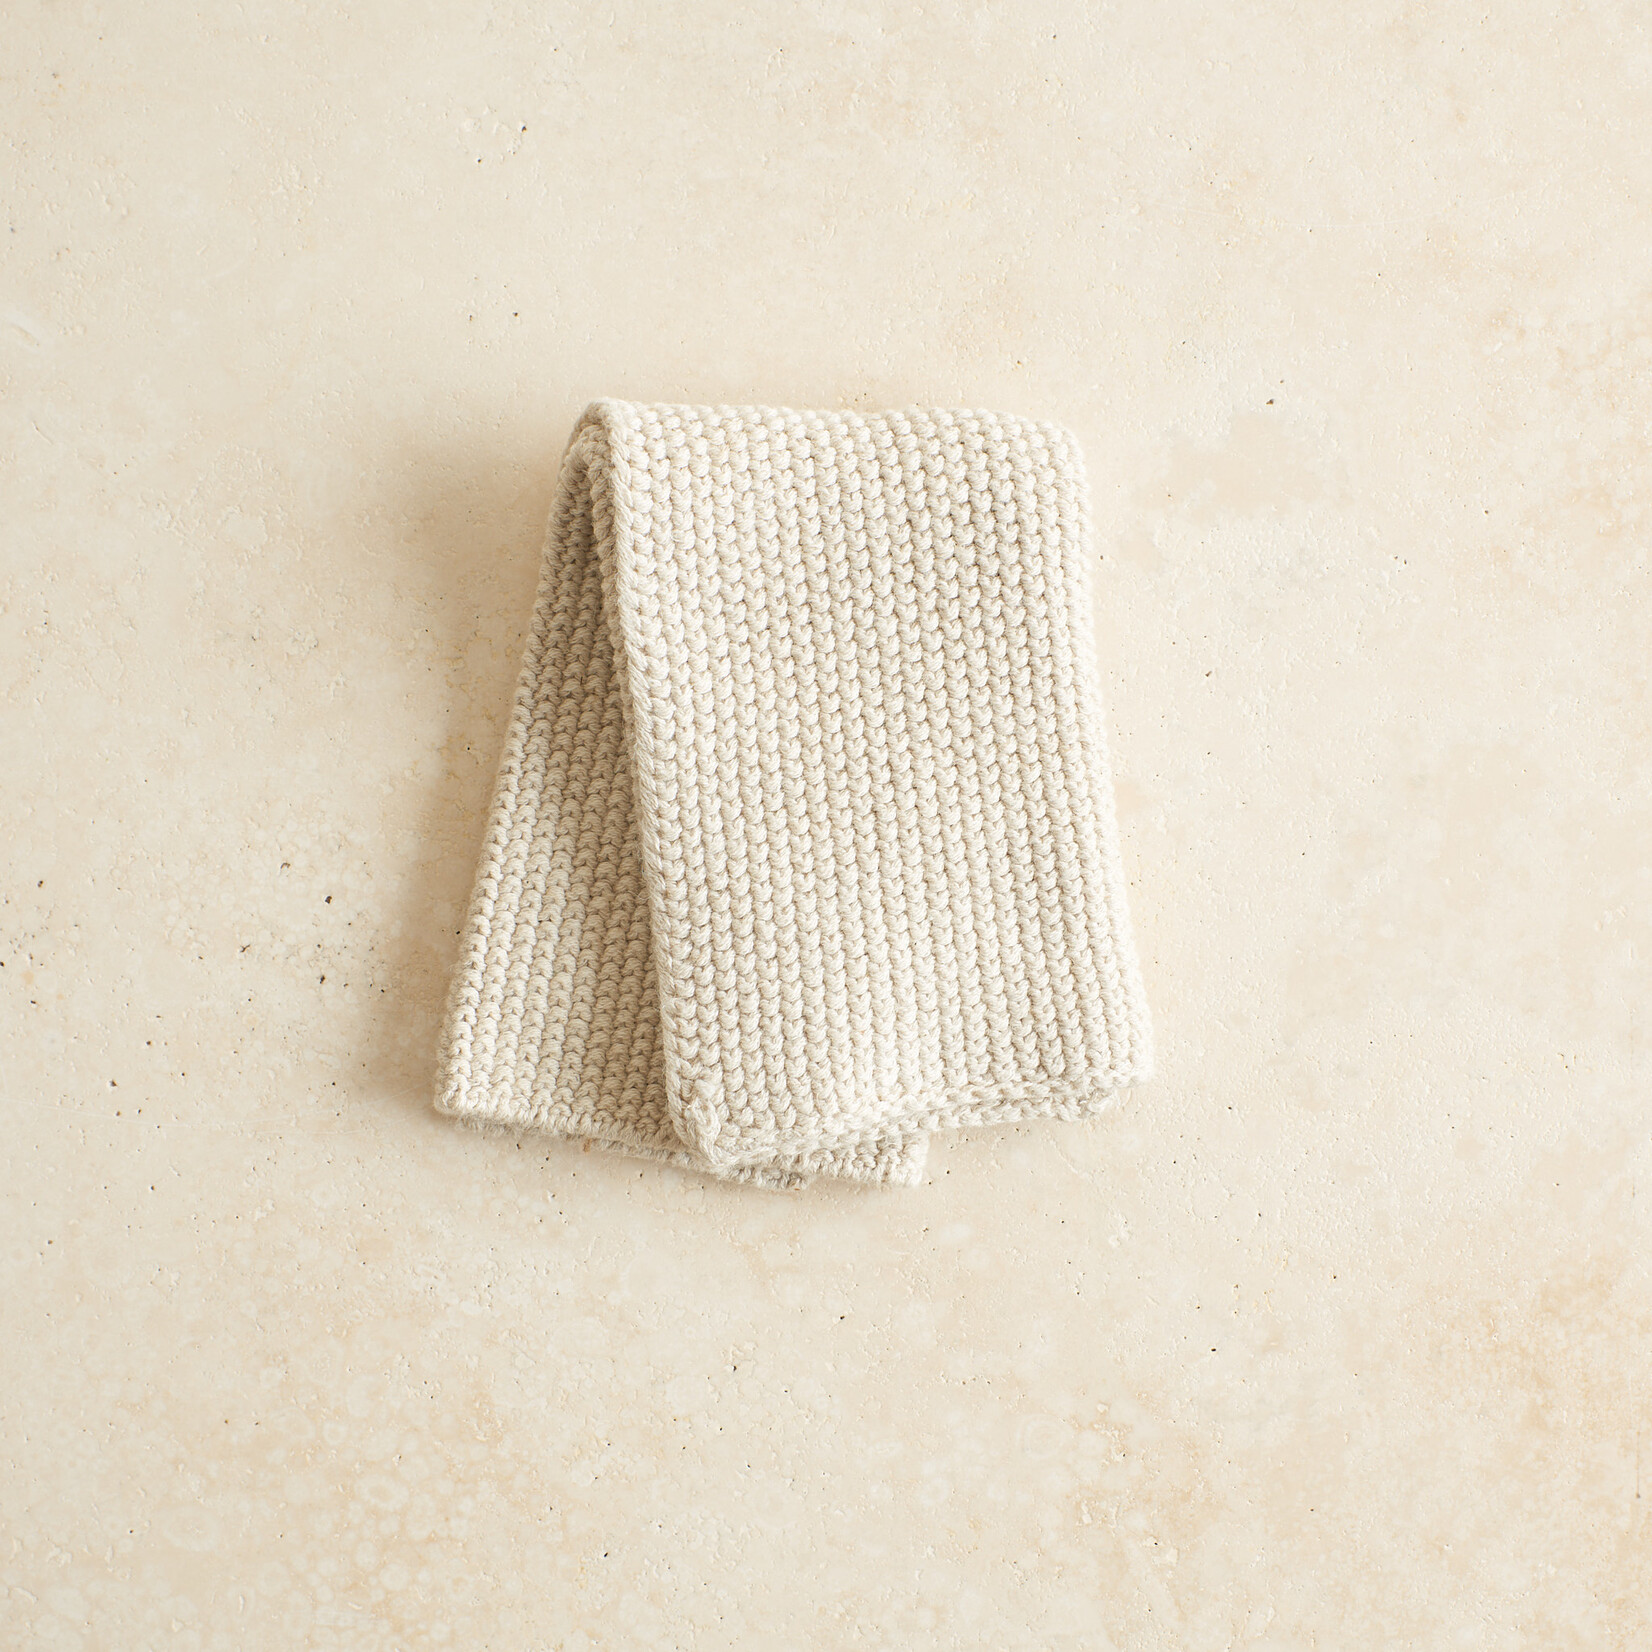 Knitted Dish Cloth